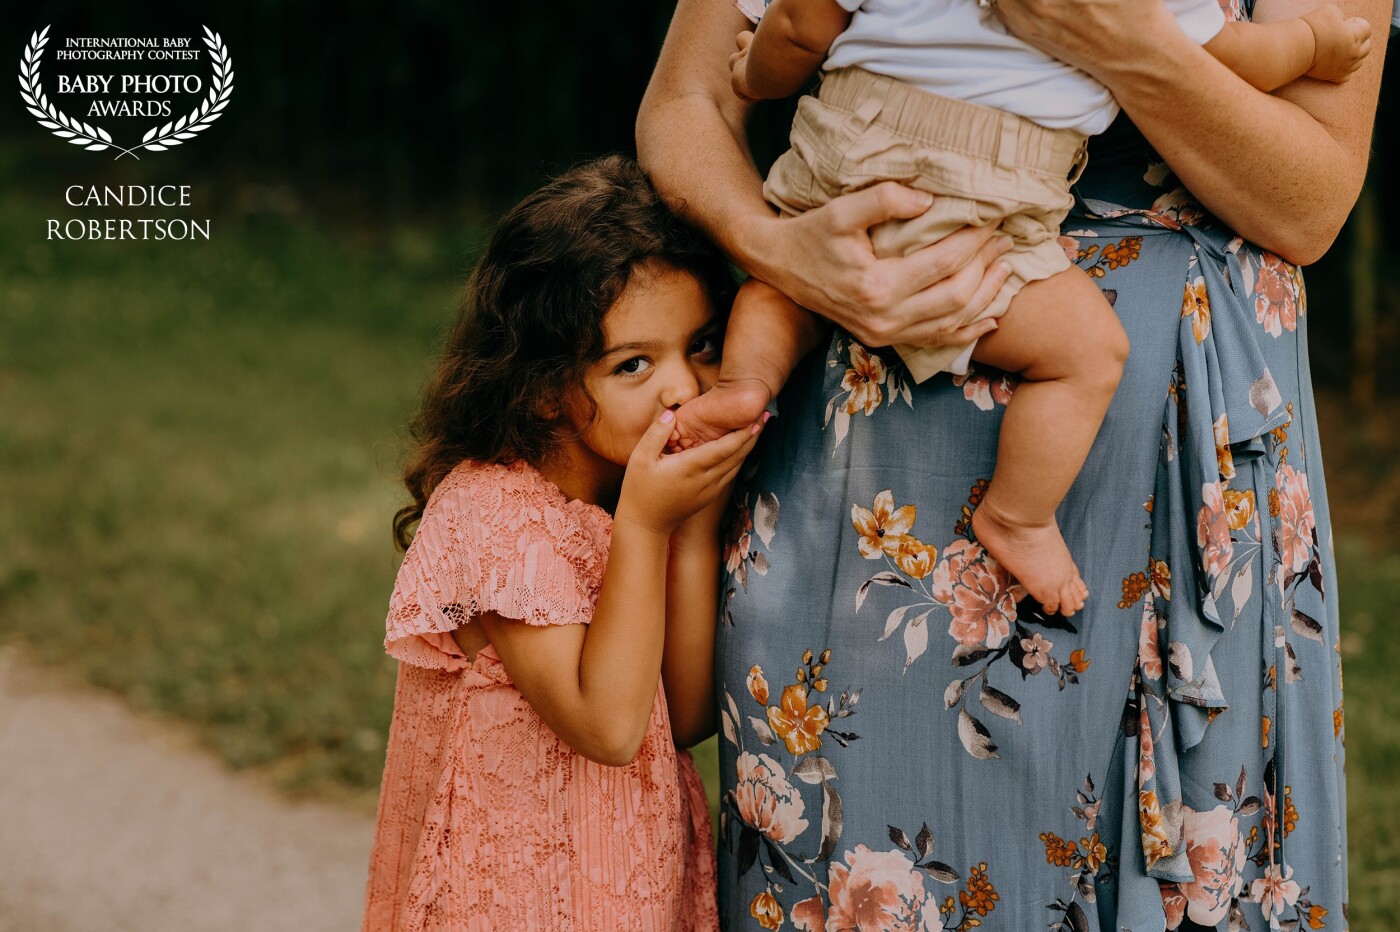 Details are my favorite part of family photography. Big Sis loves her new baby brother. He’s still in that “sugar those toes” stage which we all know they grow out of too soon. I’m so happy I could capture this sweet interaction. 